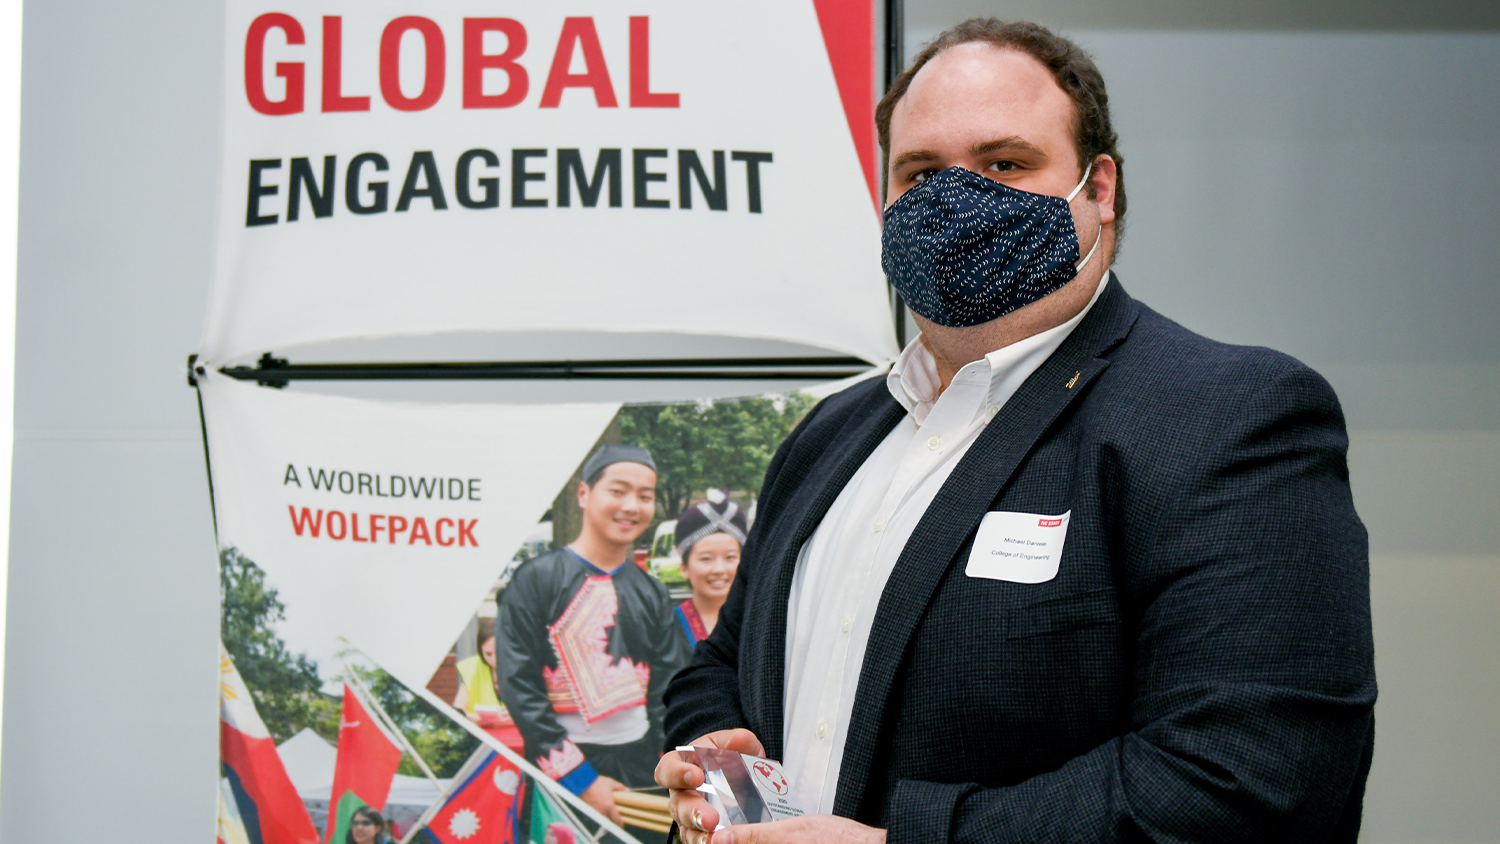 A white man holding up his award (Oustanding Global Engagement Award) in front of a NC State Global backdrop.